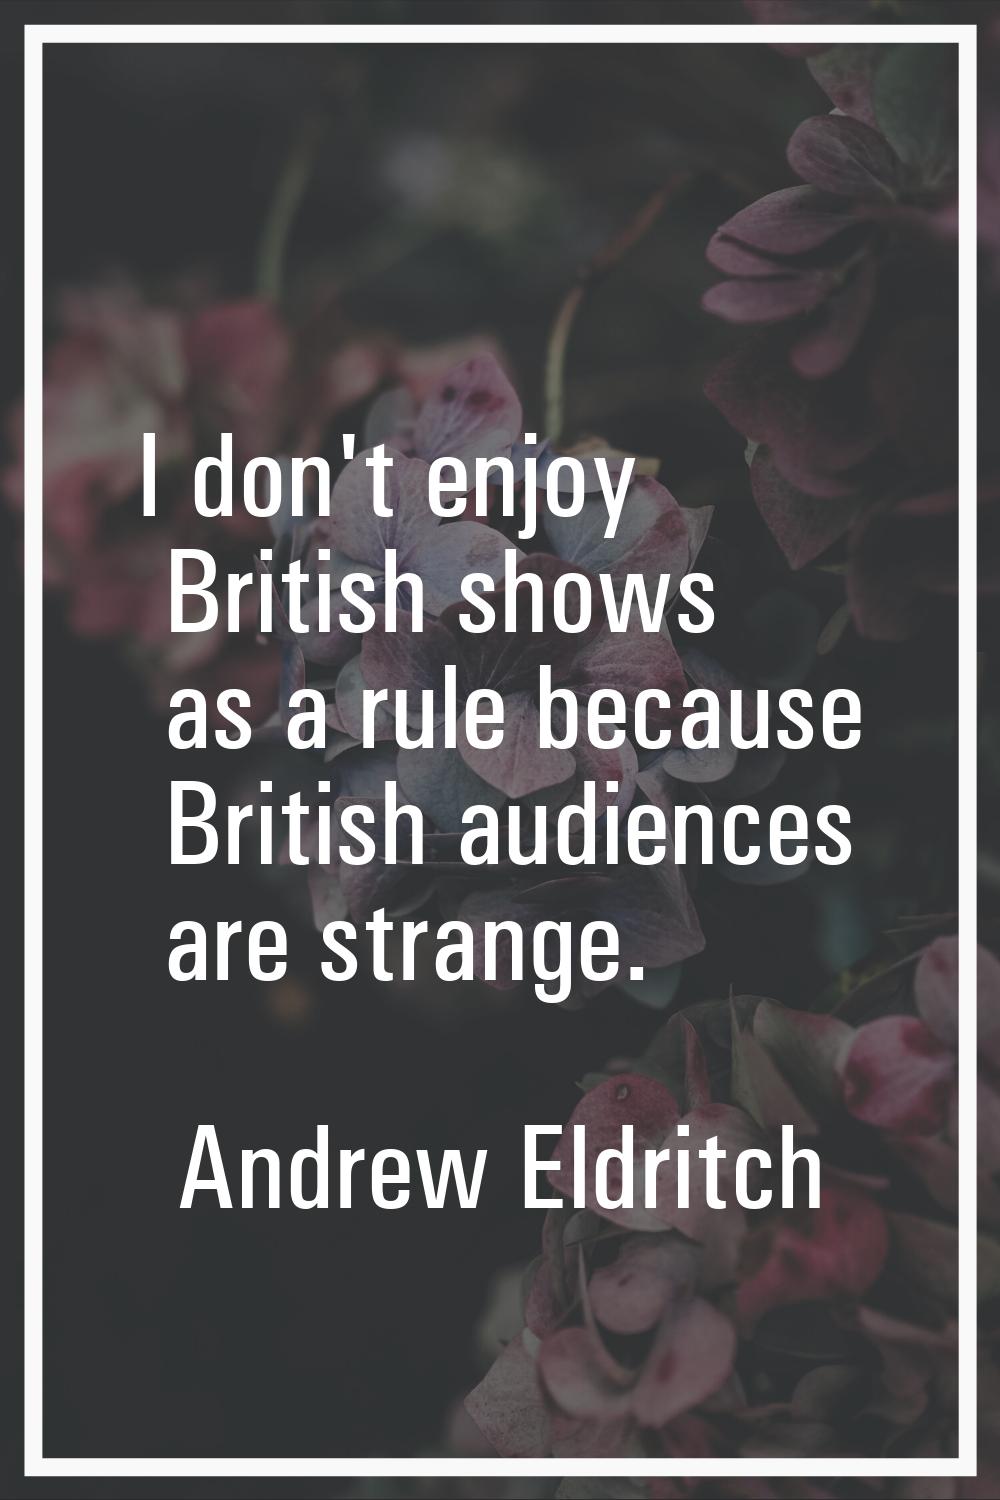 I don't enjoy British shows as a rule because British audiences are strange.